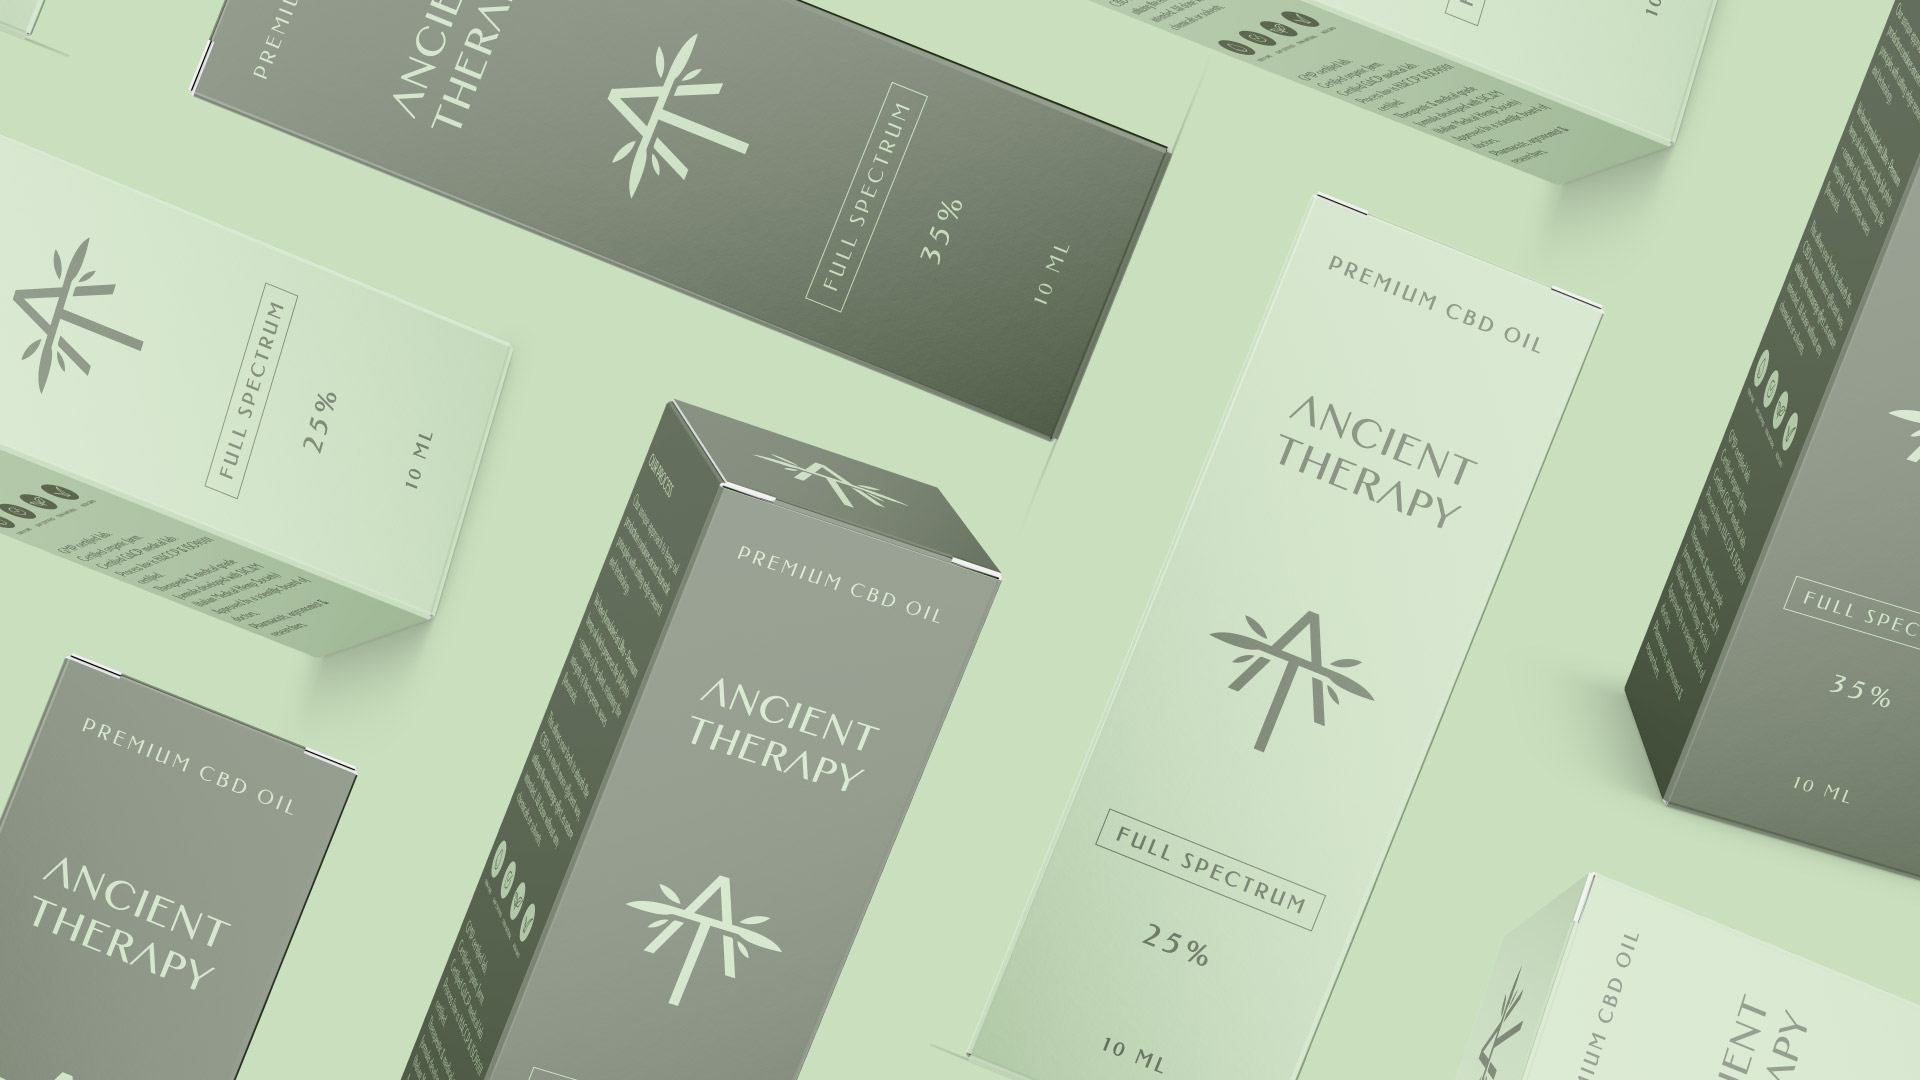 Ancient Therapy Packaging